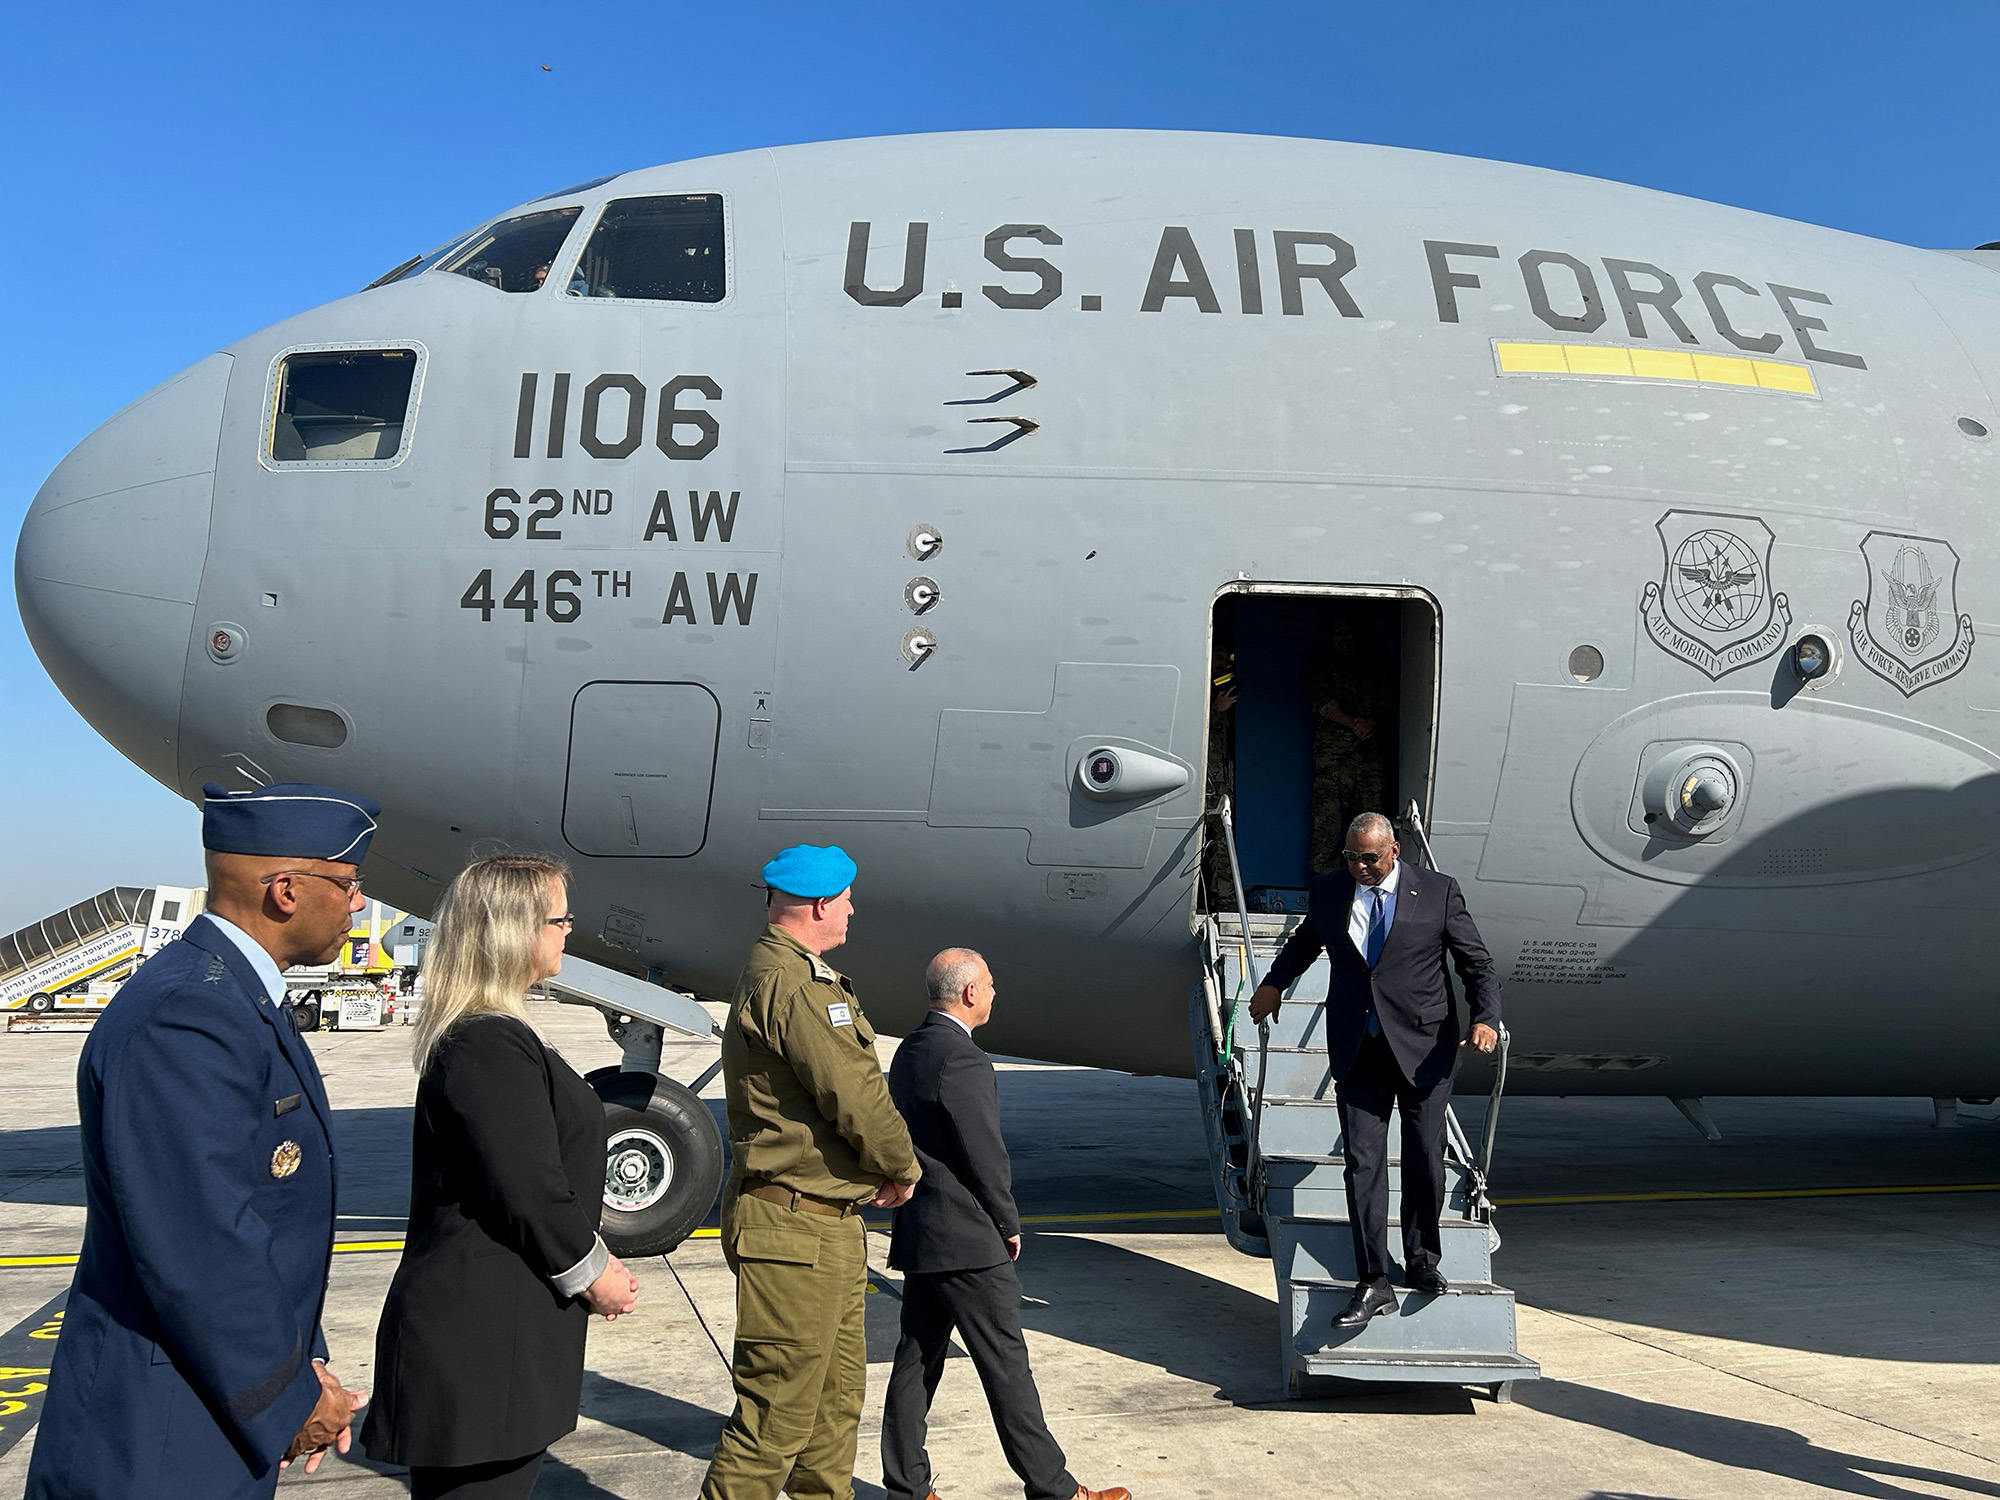 U.S. Secretary of Defense Lloyd Austin disembarks from an aircraft as he arrives for an official visit to Israel at Ben Gurion International Airport, in Lod, Israel, on December 18.